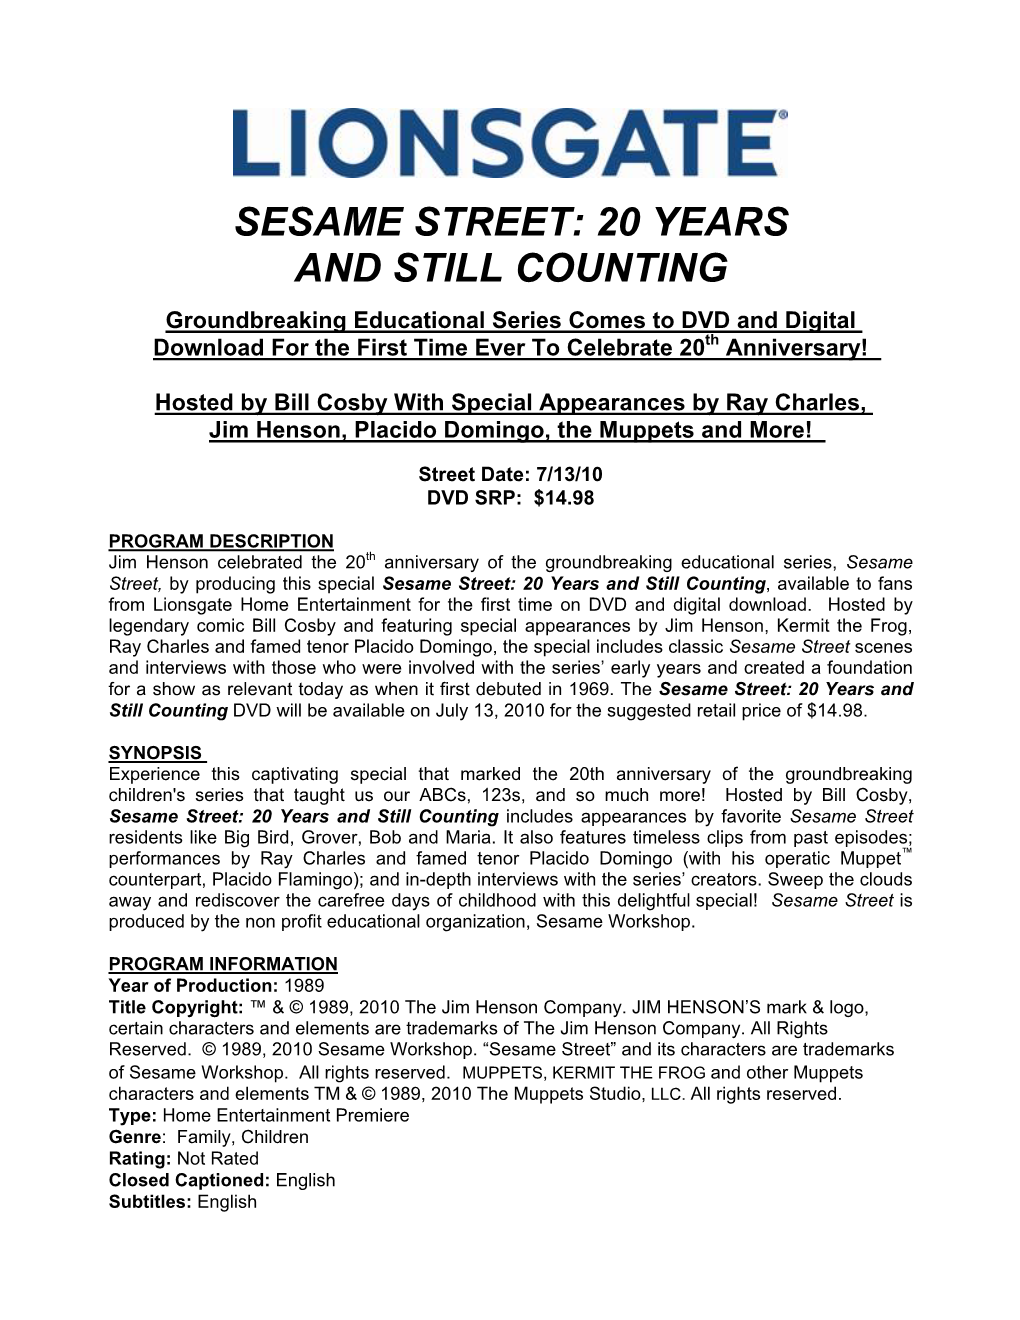 Sesame Street: 20 Years and Still Counting